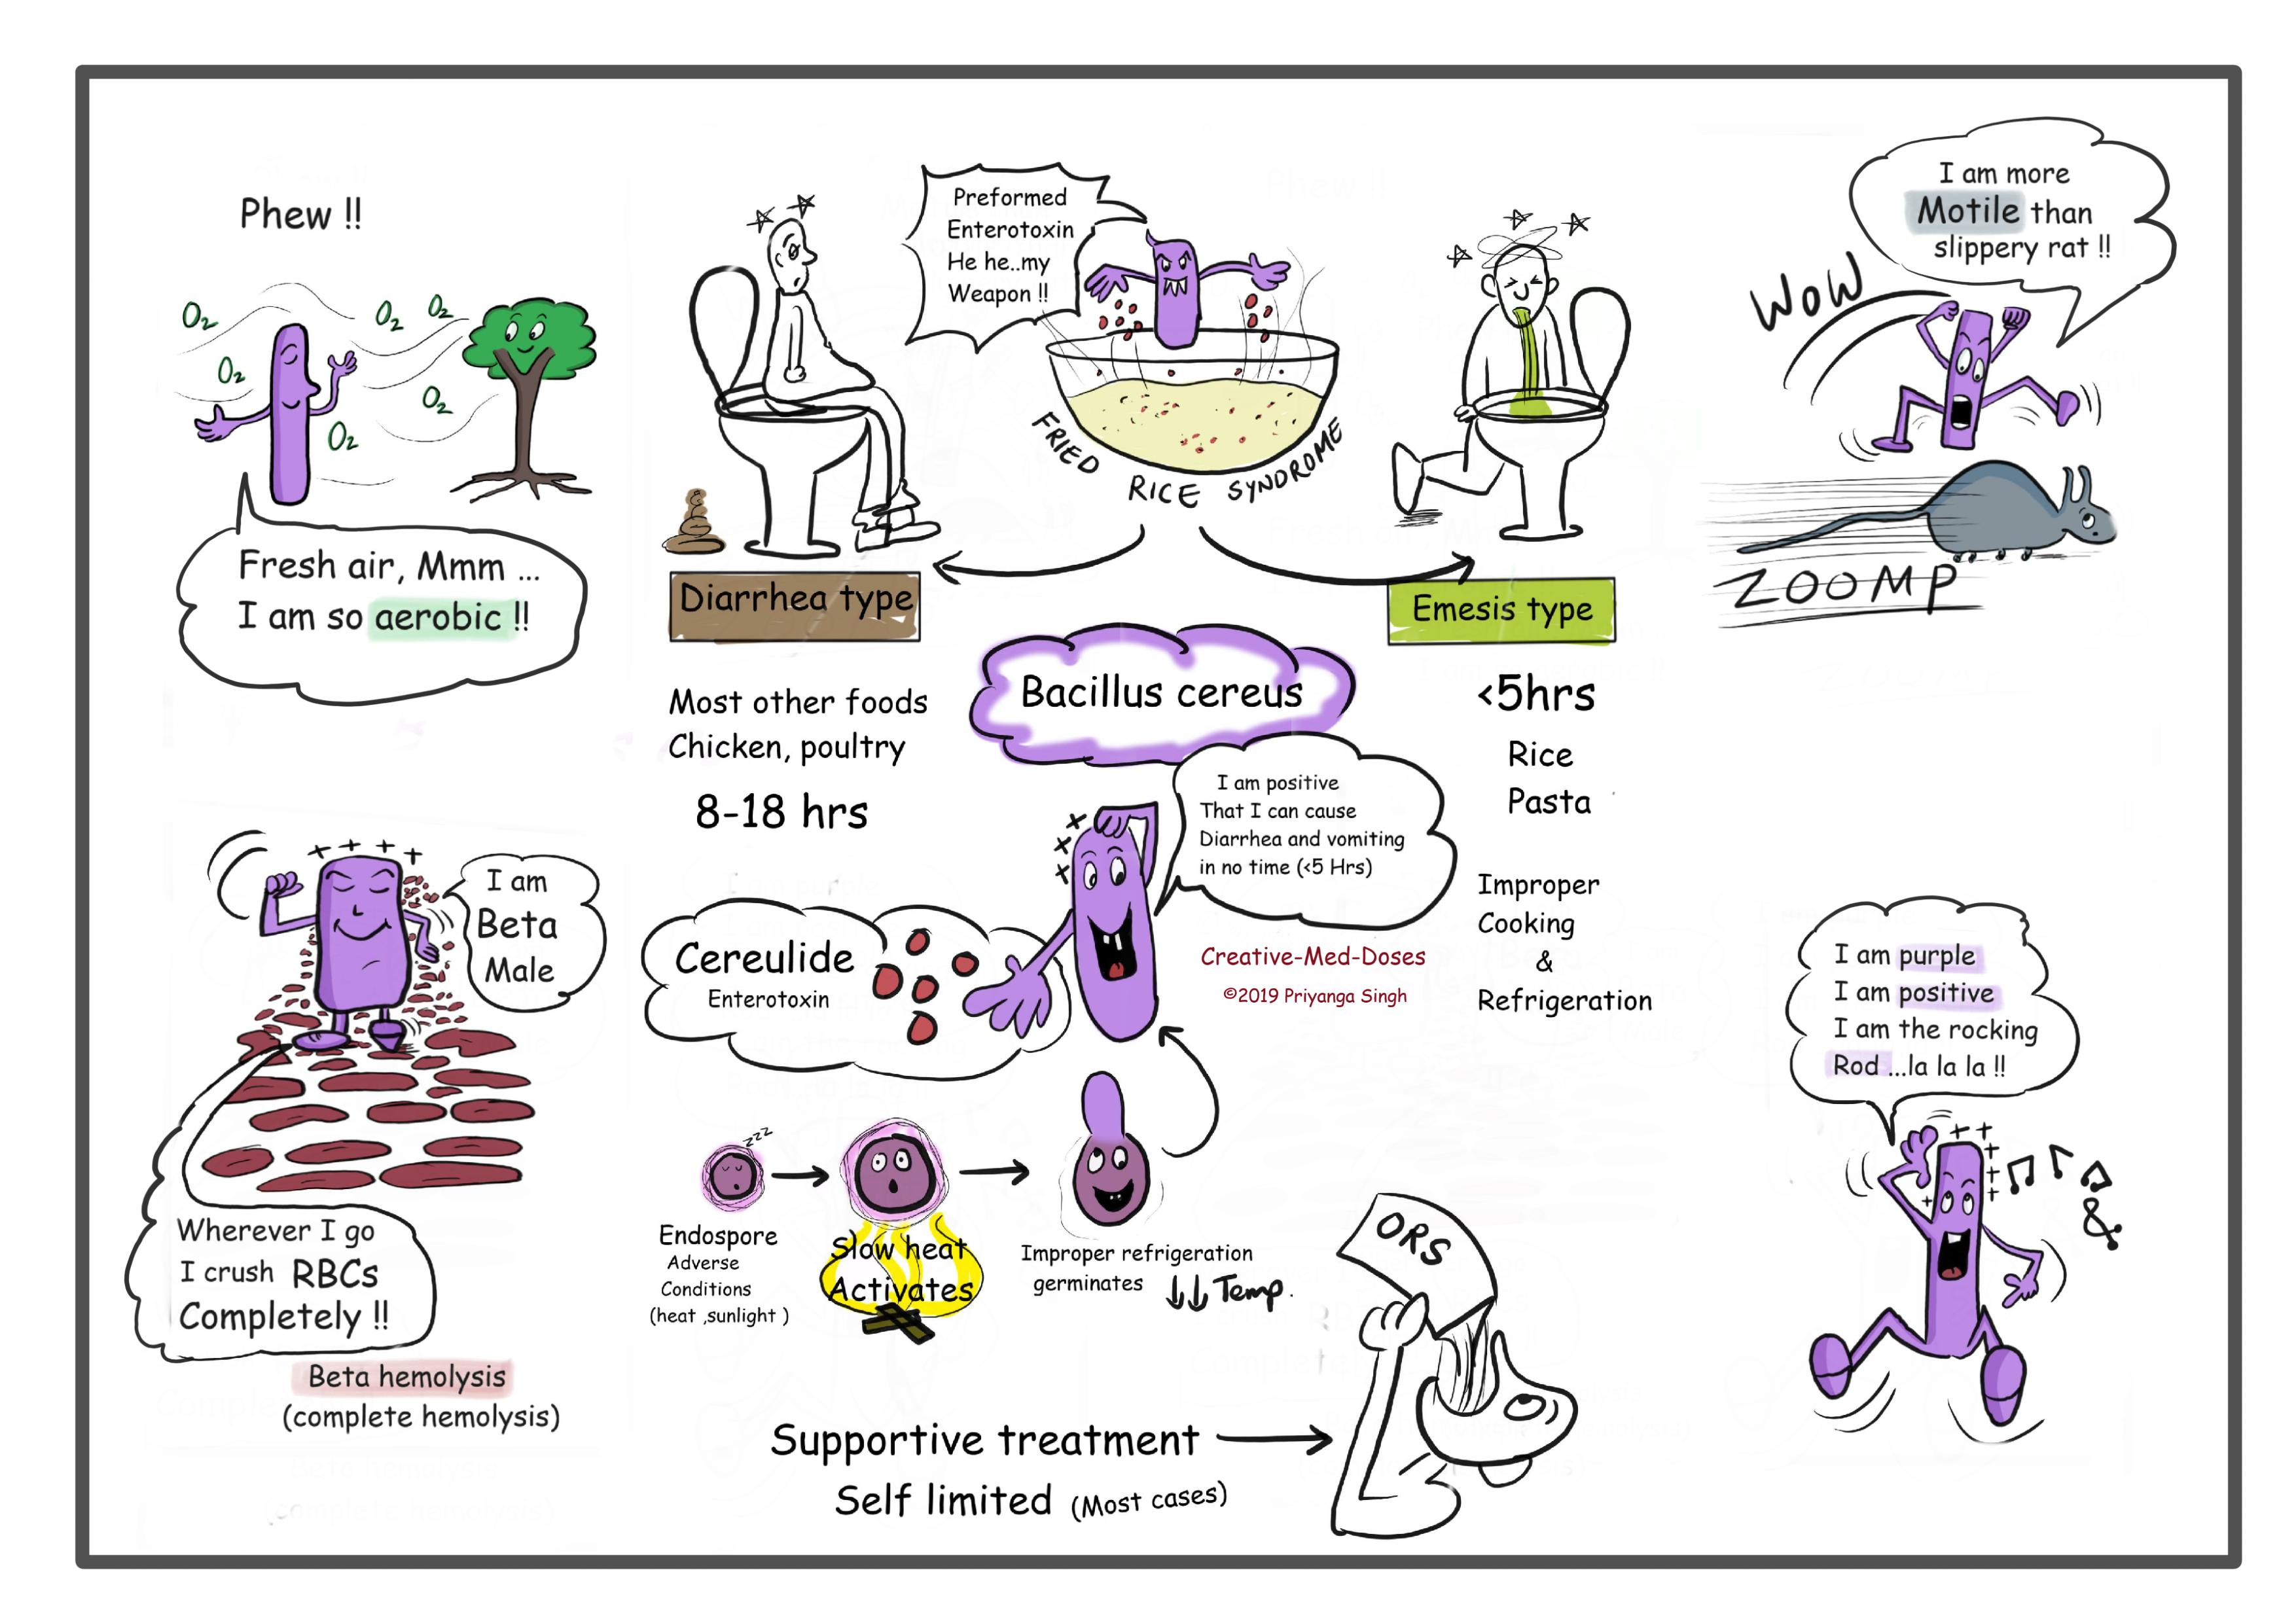 Bacillus cereus clinical details and types visual map